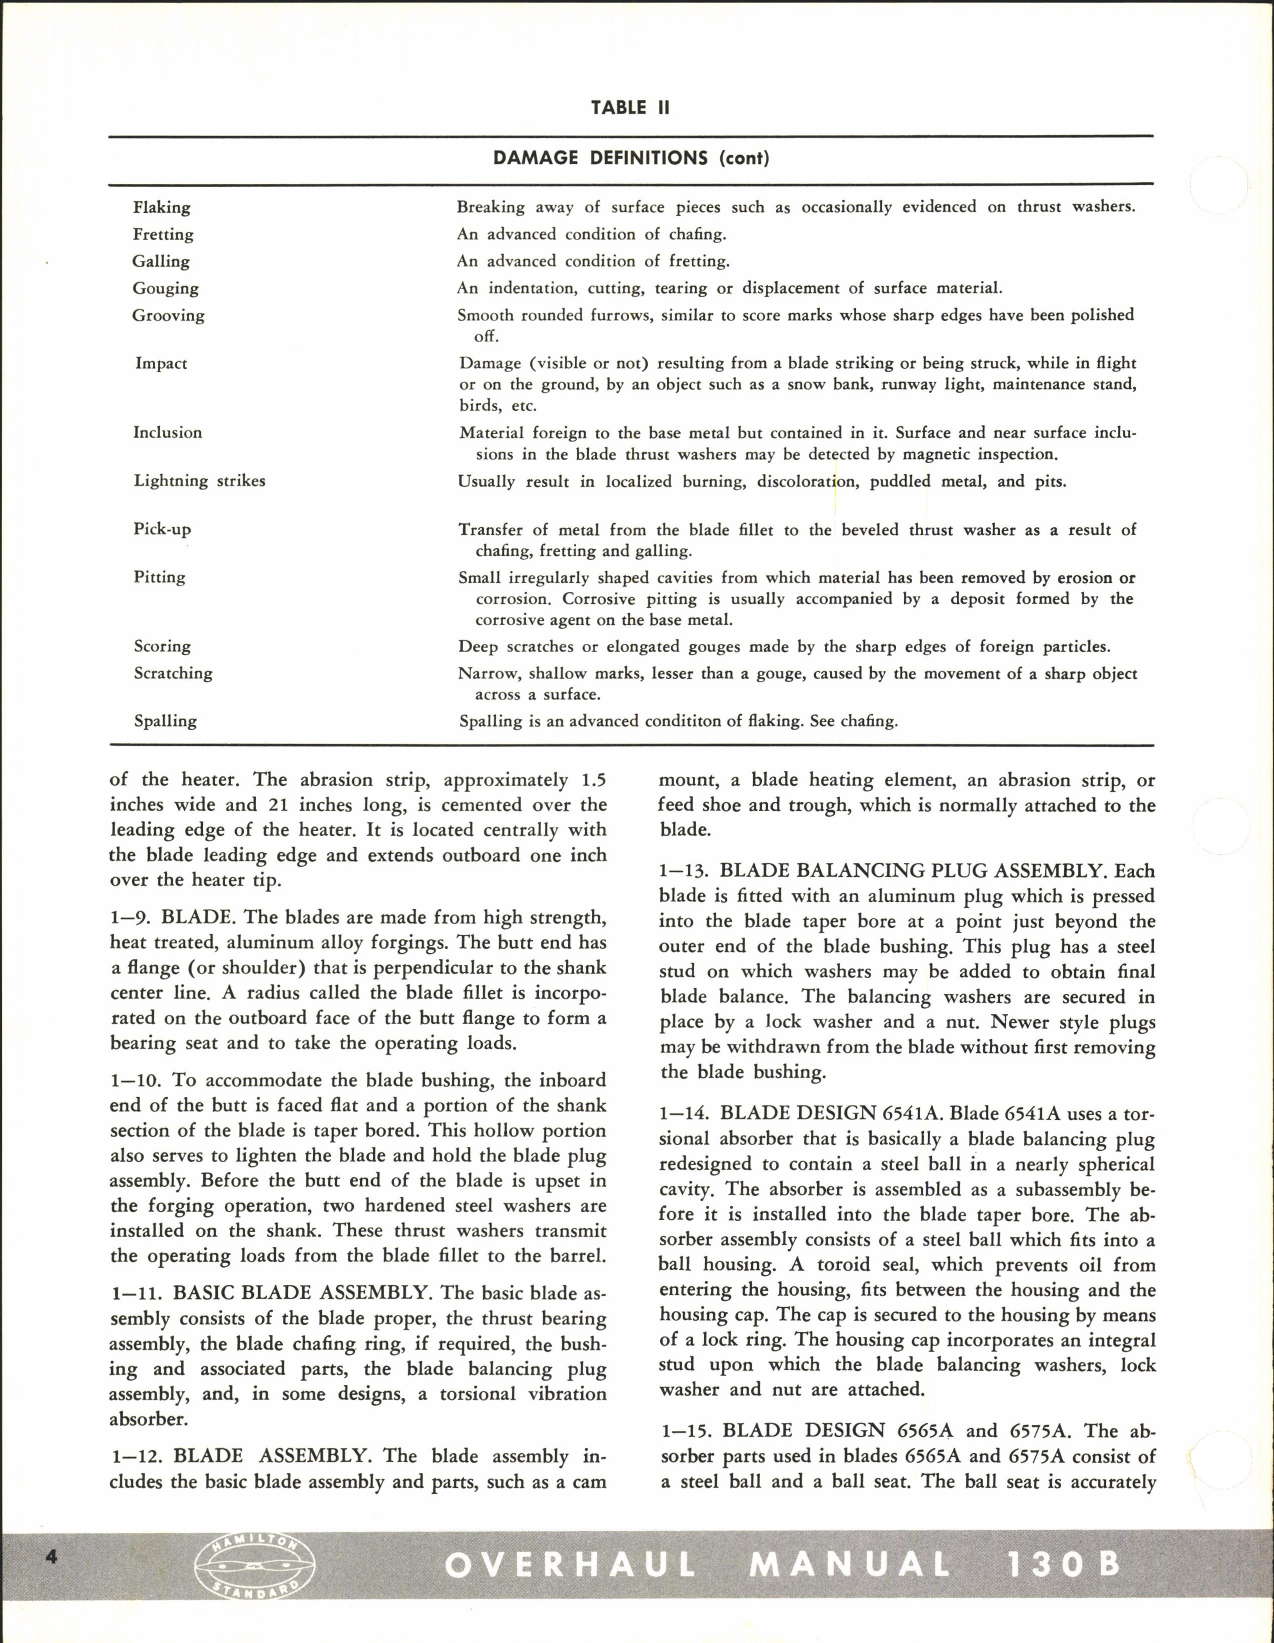 Sample page 24 from AirCorps Library document: Aluminum Blade Overhaul Manual for Hamilton Standard Propellers